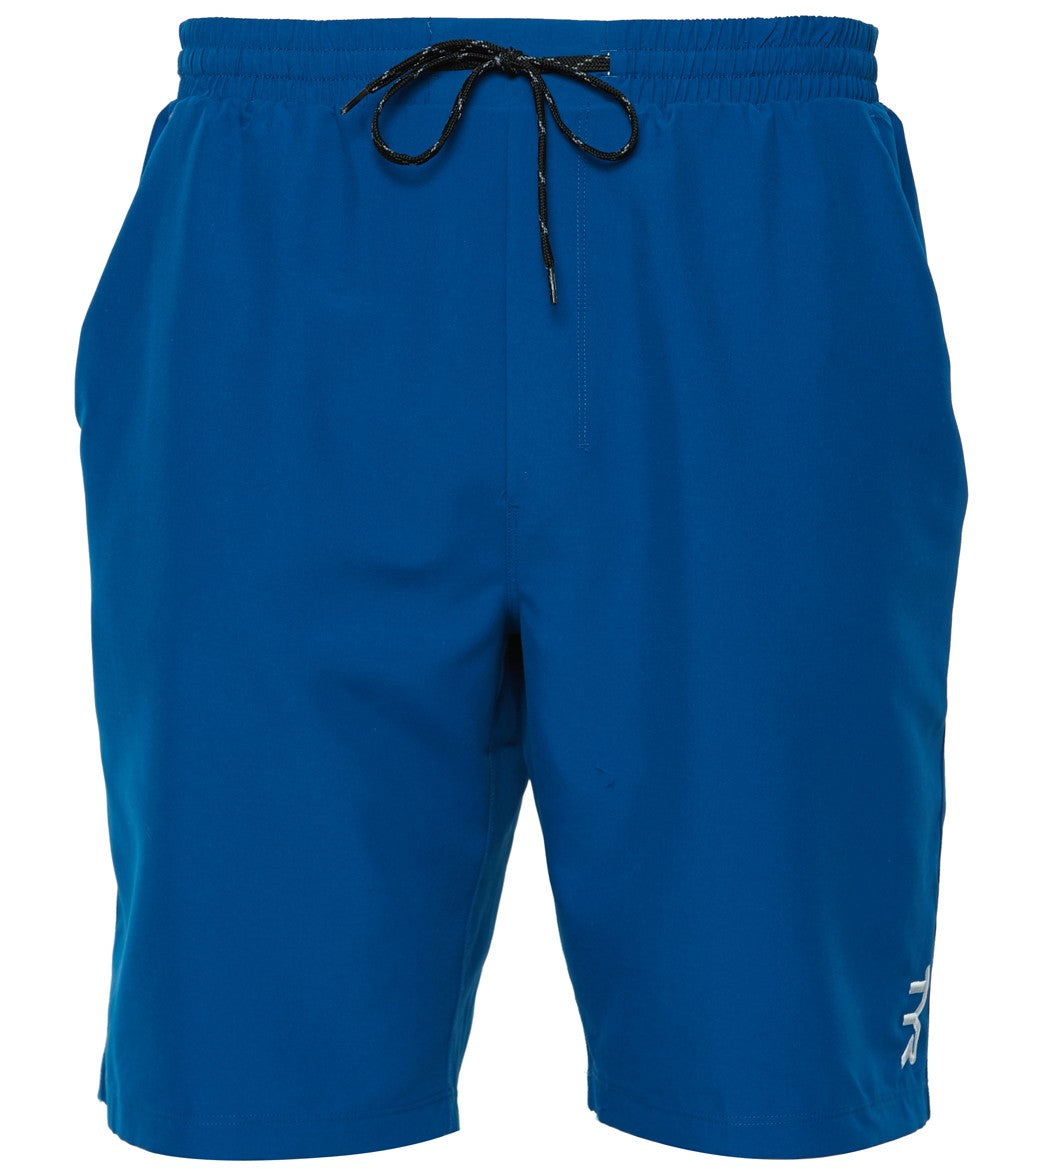 TYR Men's Solid Swell Swim Short - Turquoise Xxl - Swimoutlet.com